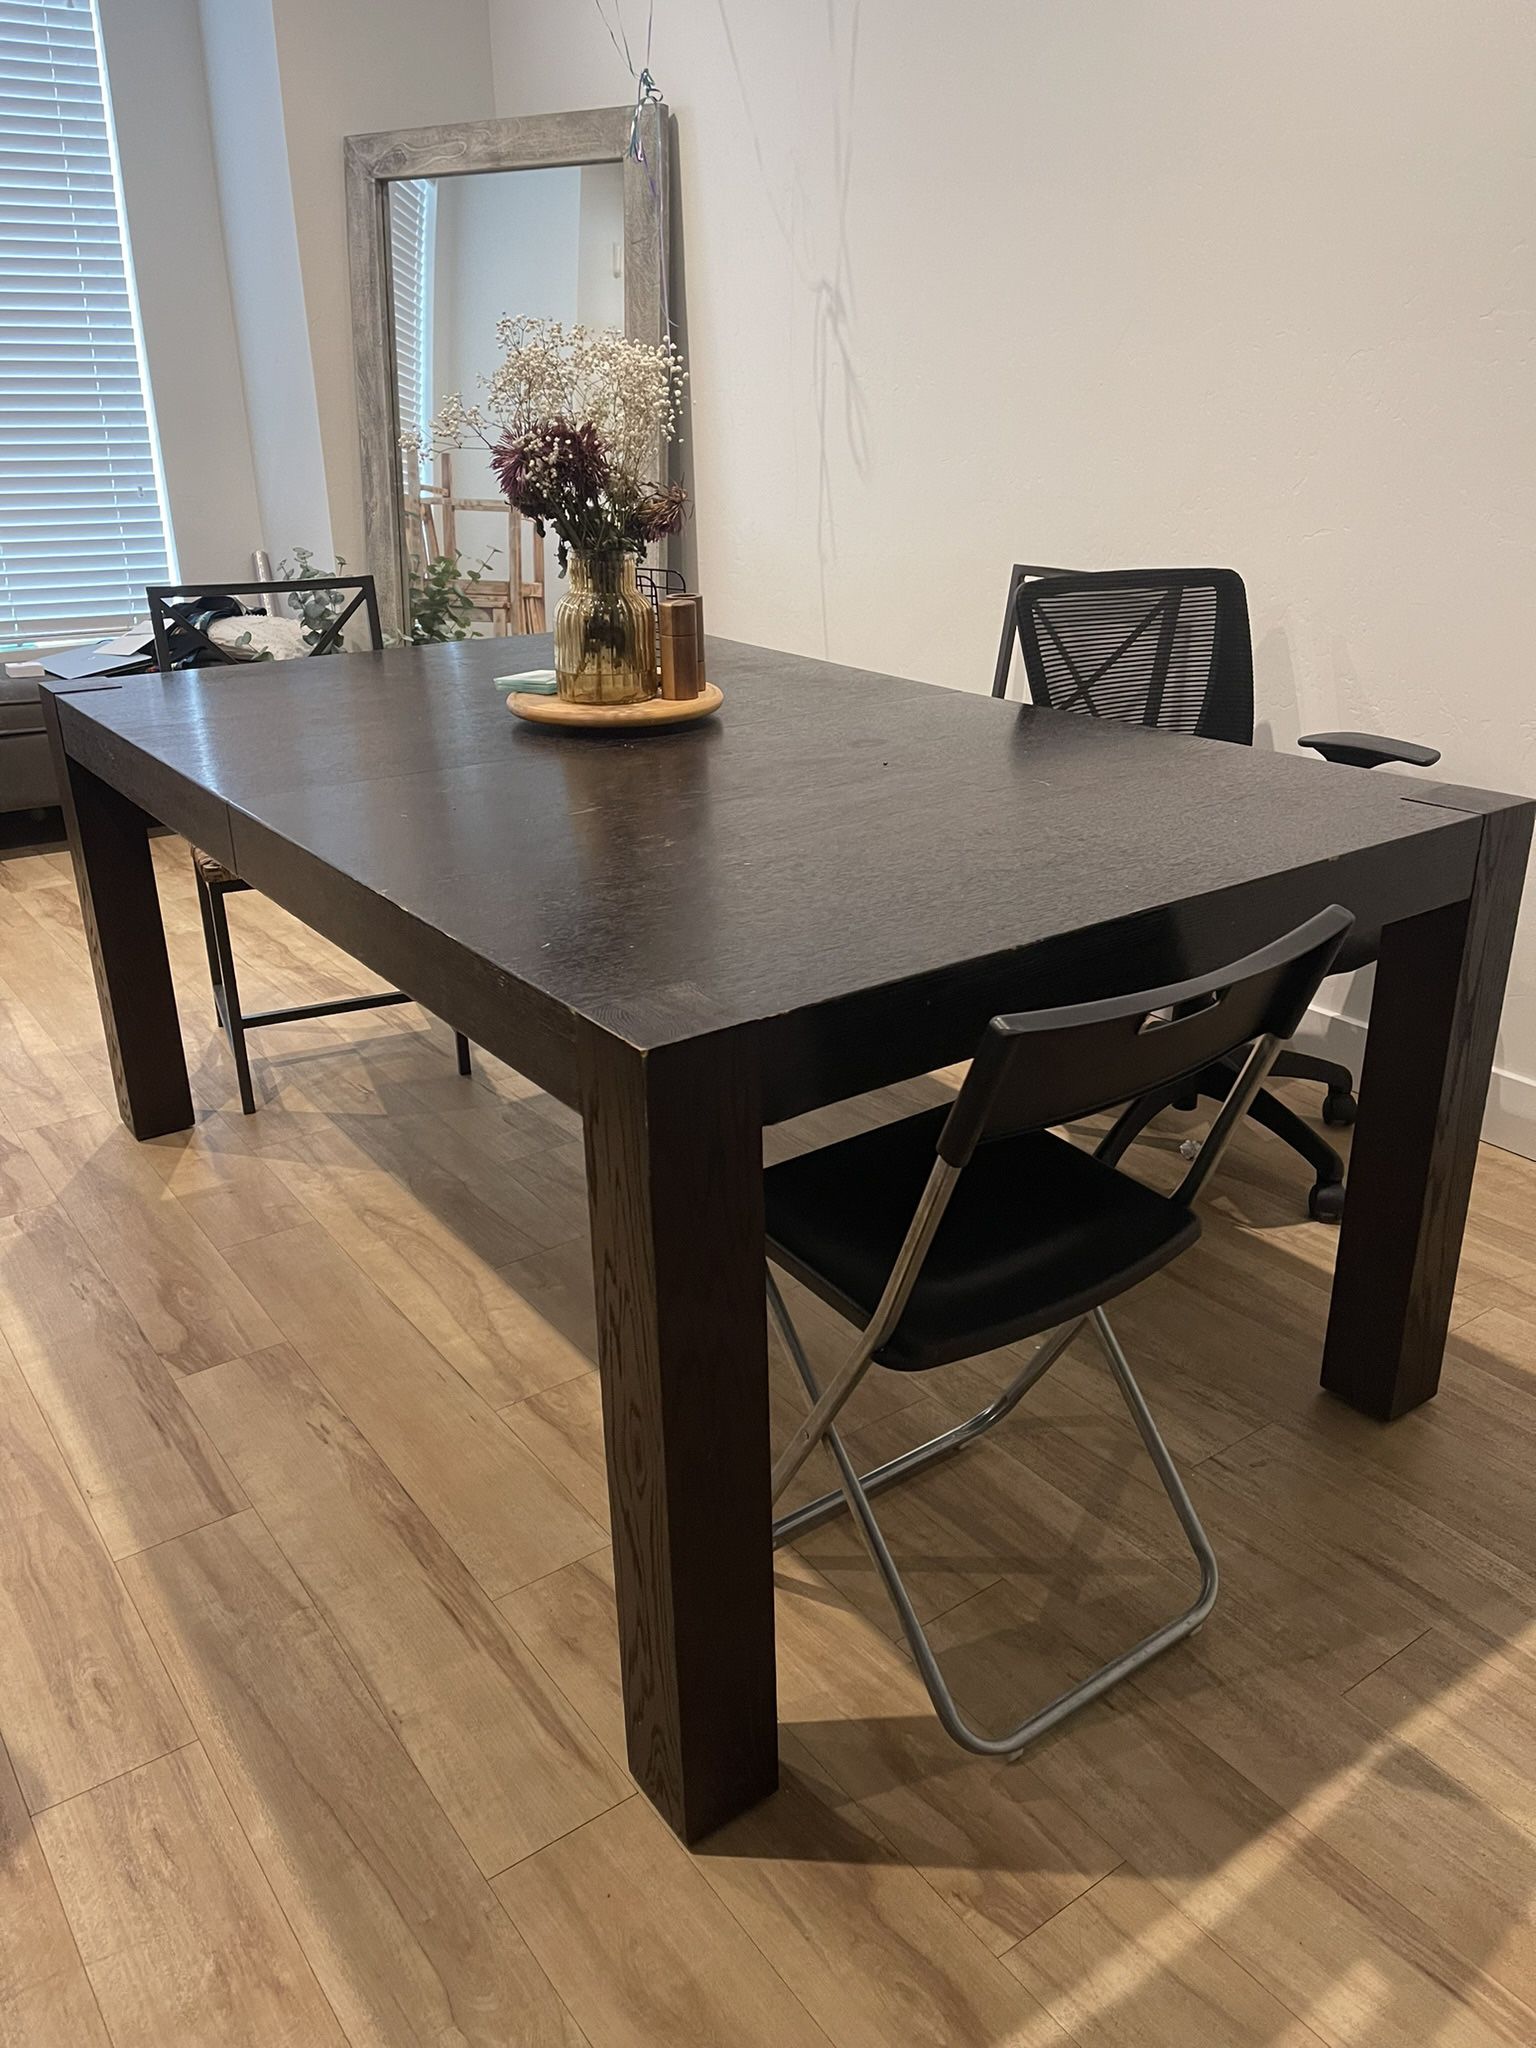 Large Dining Table With Inserts